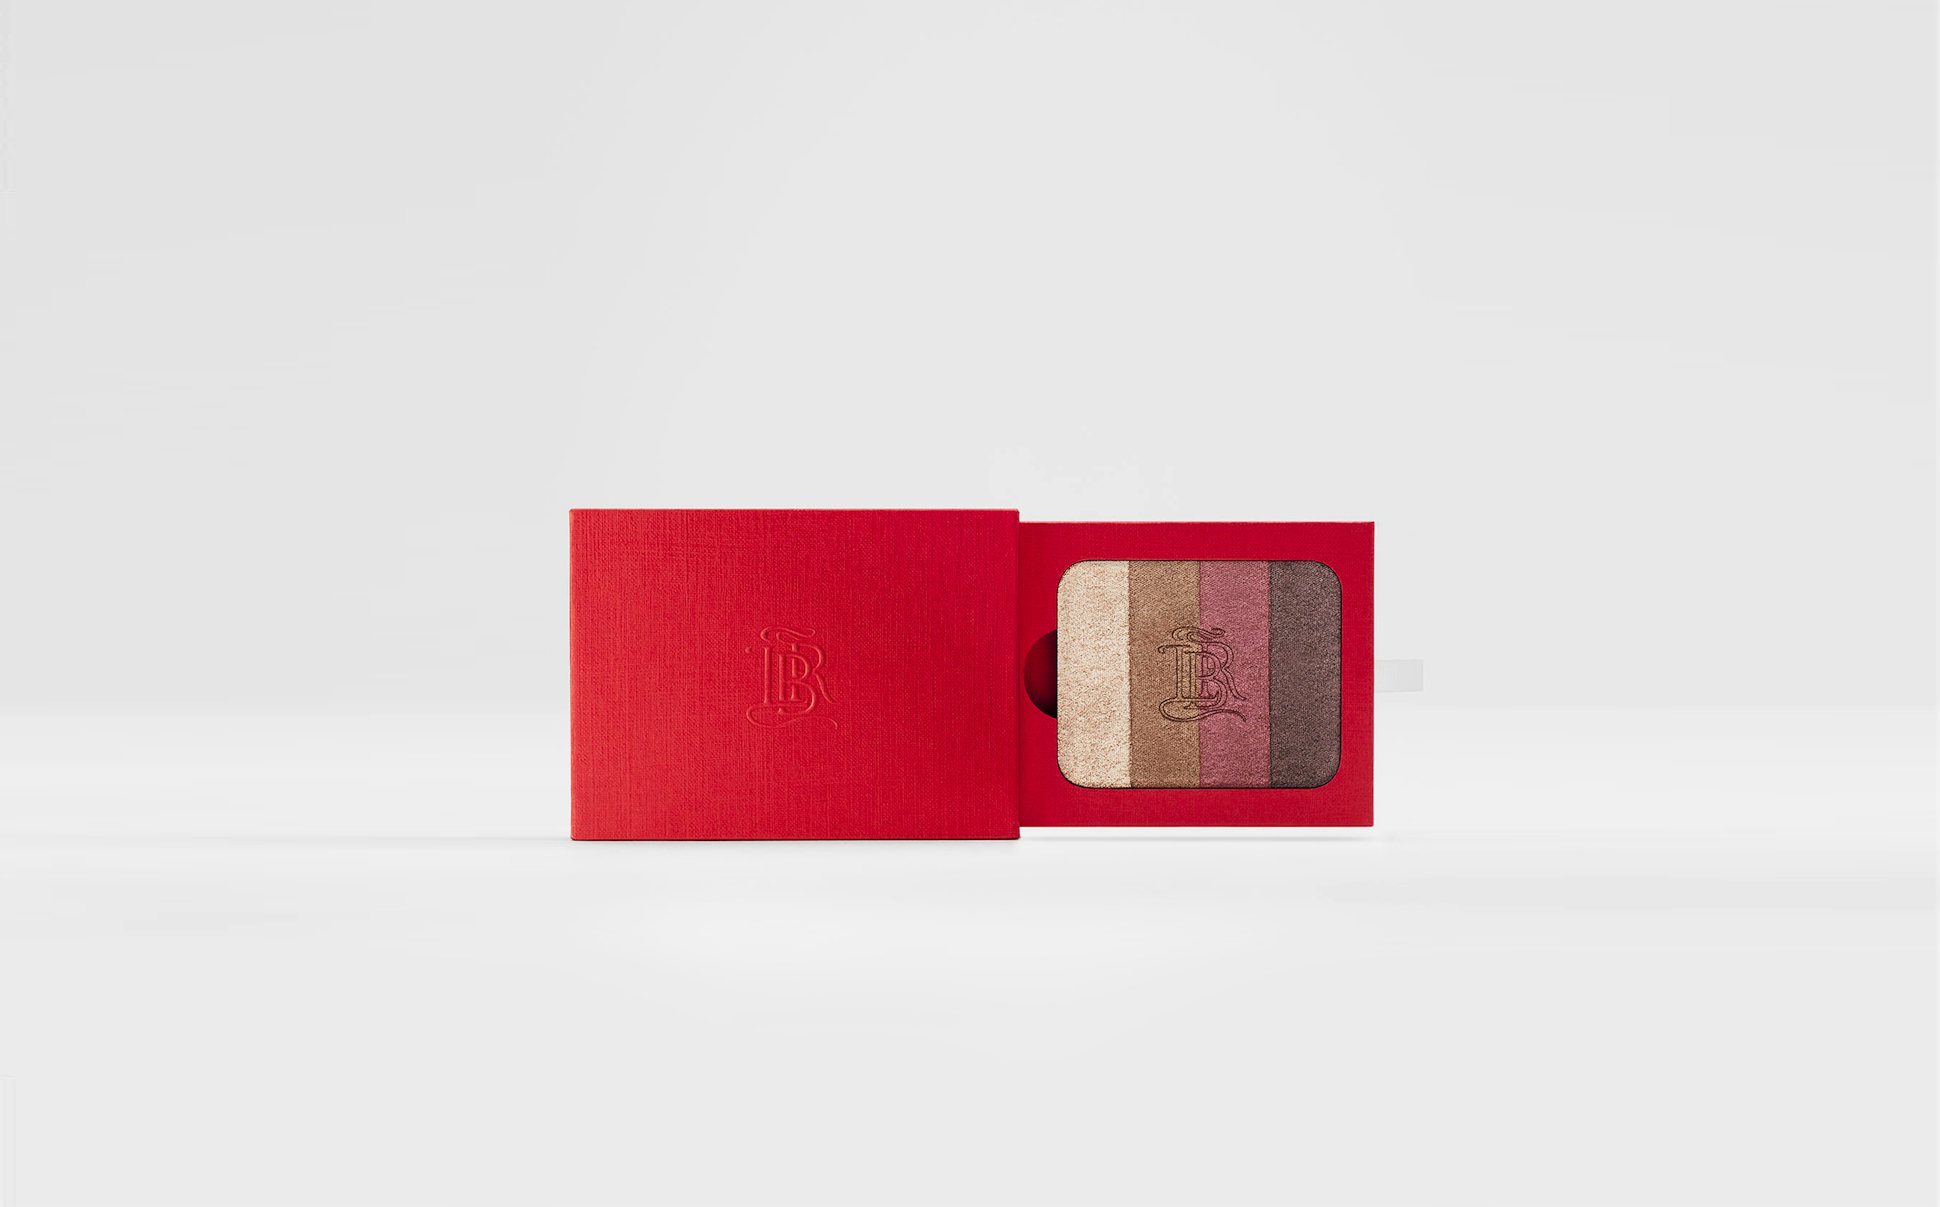 La bouche rouge les Ombres Chilwa eyeshadow palette in the red paper case